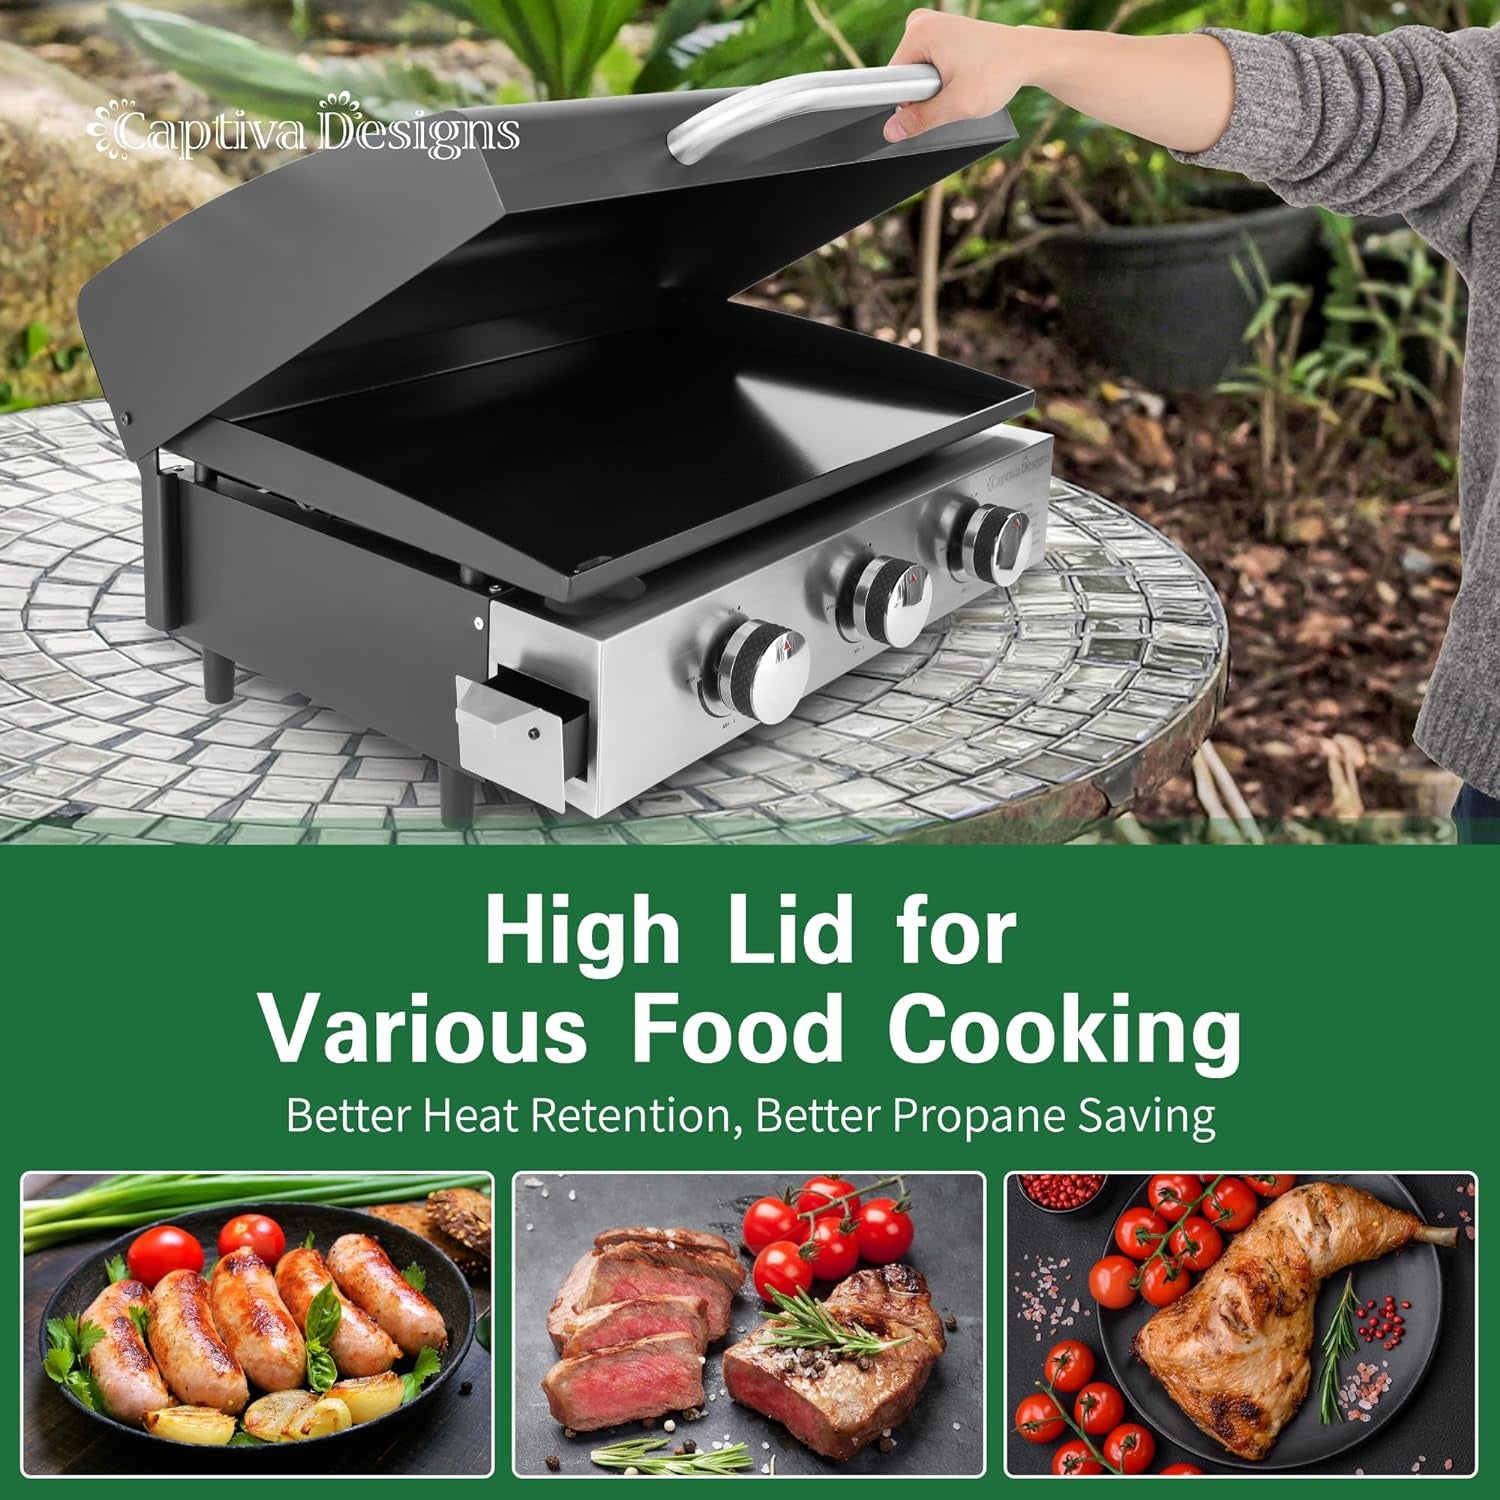 Tabletop Griddle with Ceramic Coated Cast Iron Plate, Portable Flat Top Propane Gas BBQ Grill Griddle Camping, Outdoor & Tailgating, 24,000 BTU Output, 3 Stainless Steel Burners